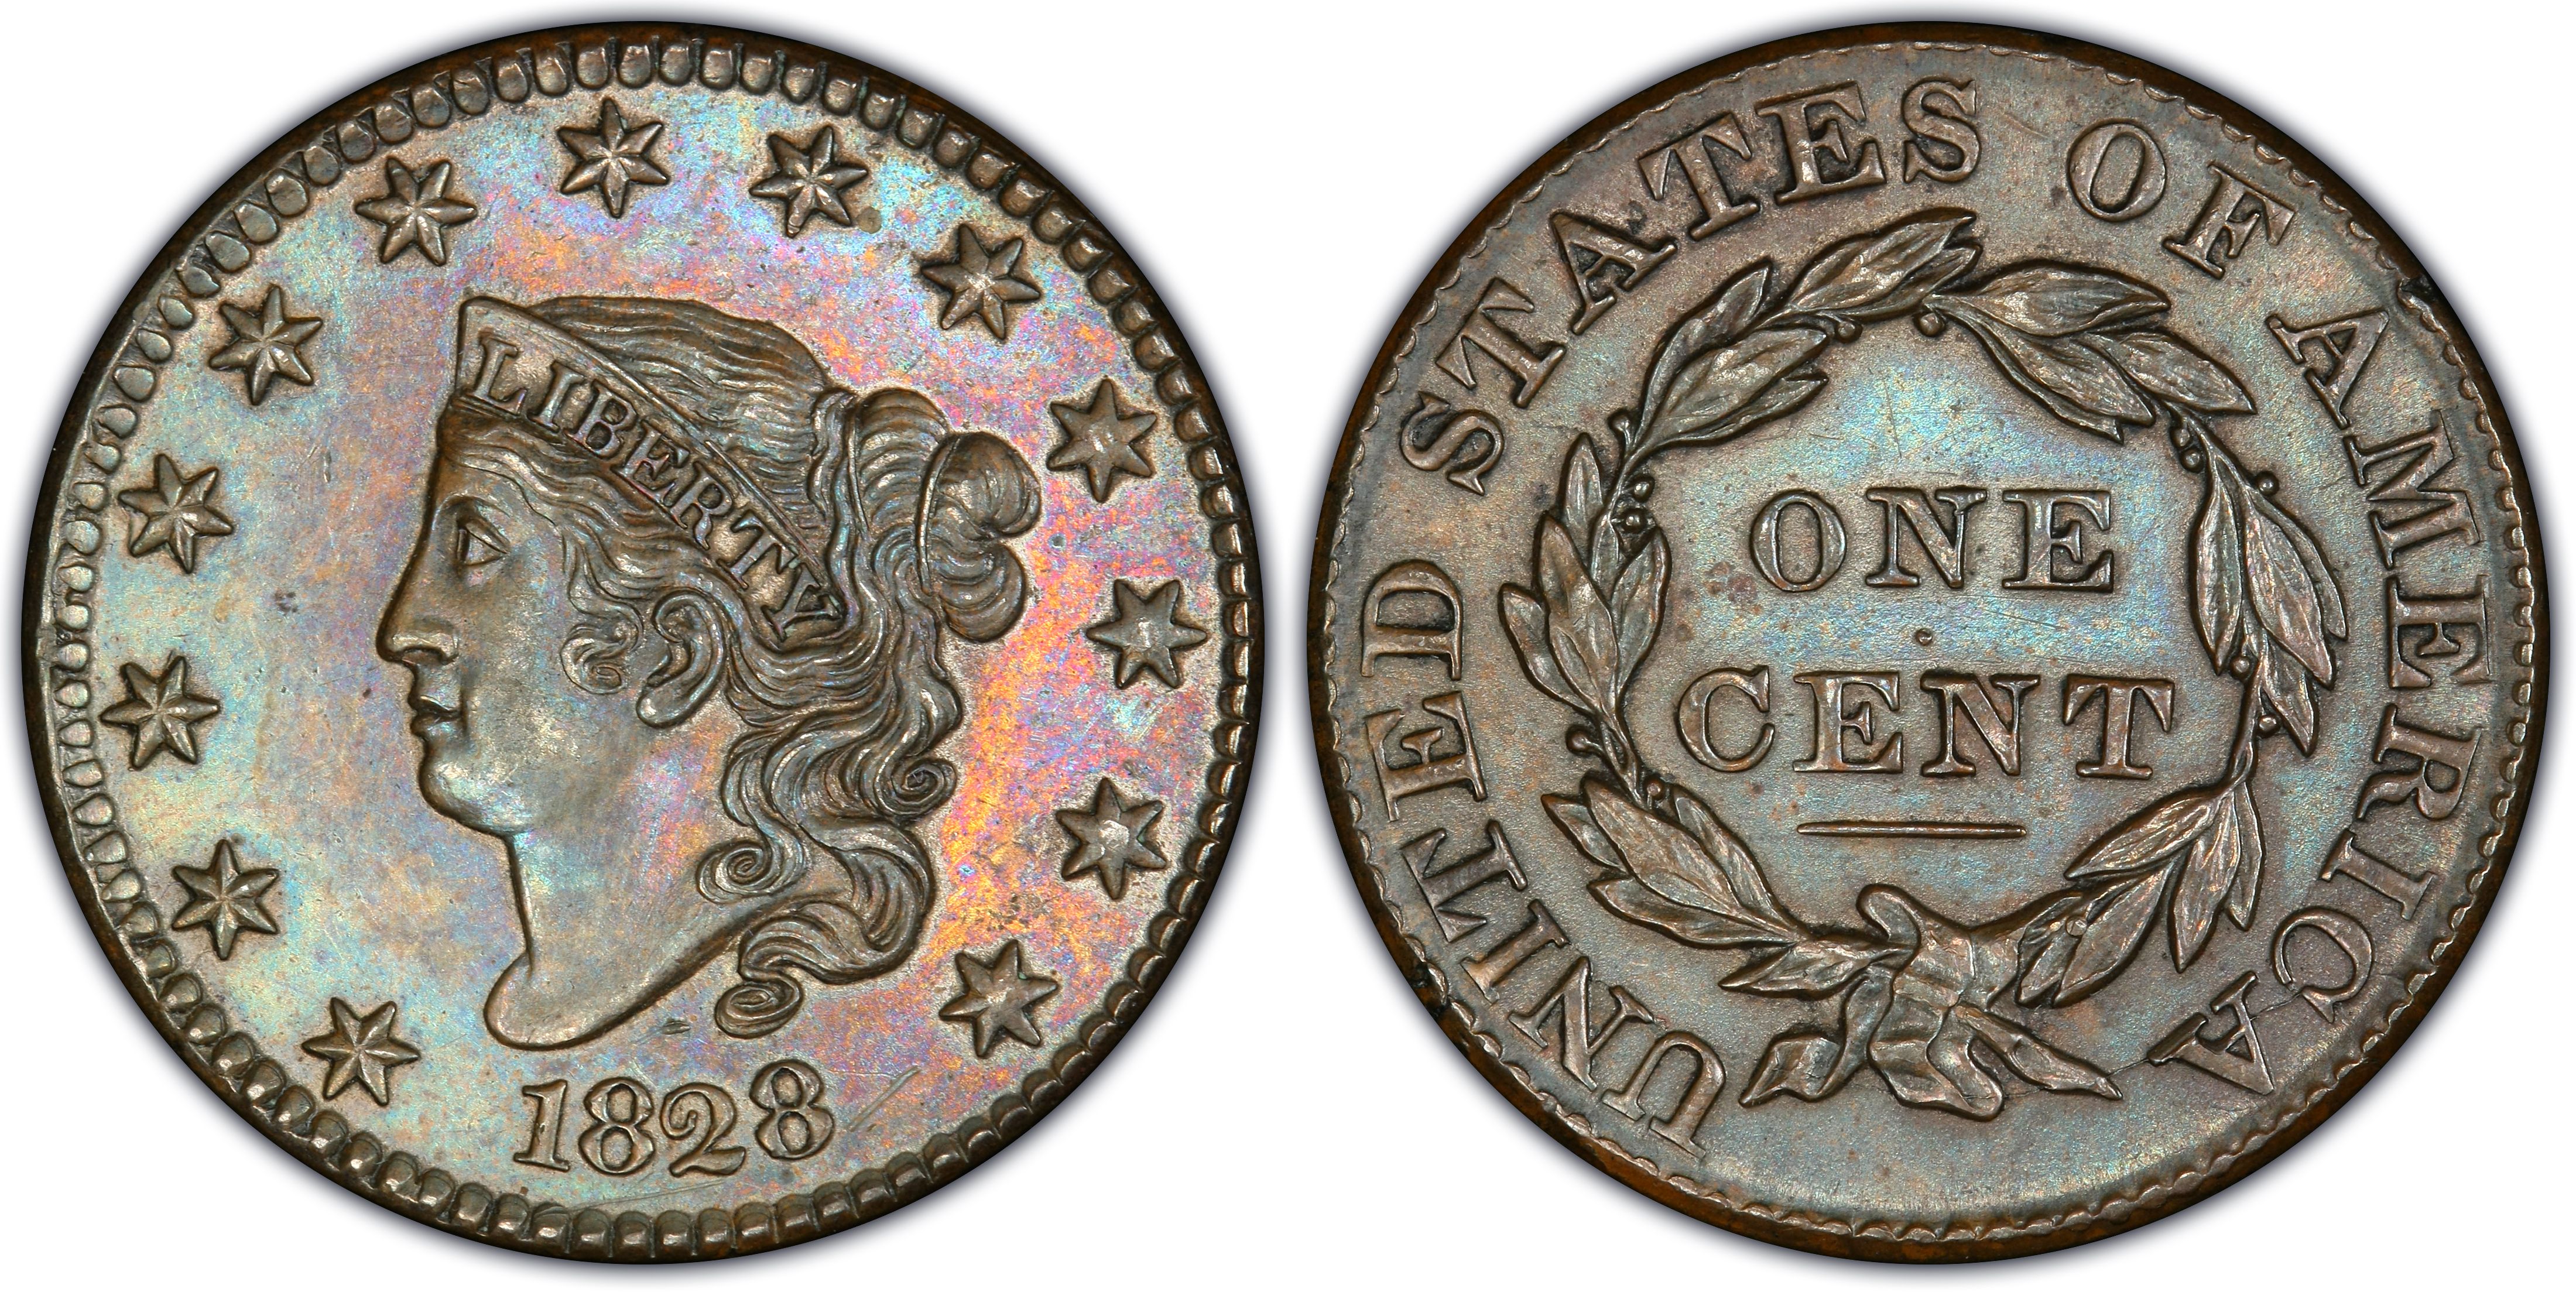 1828 1C Newcomb 1, BN (Regular Strike) Coronet Head Cent - PCGS CoinFacts